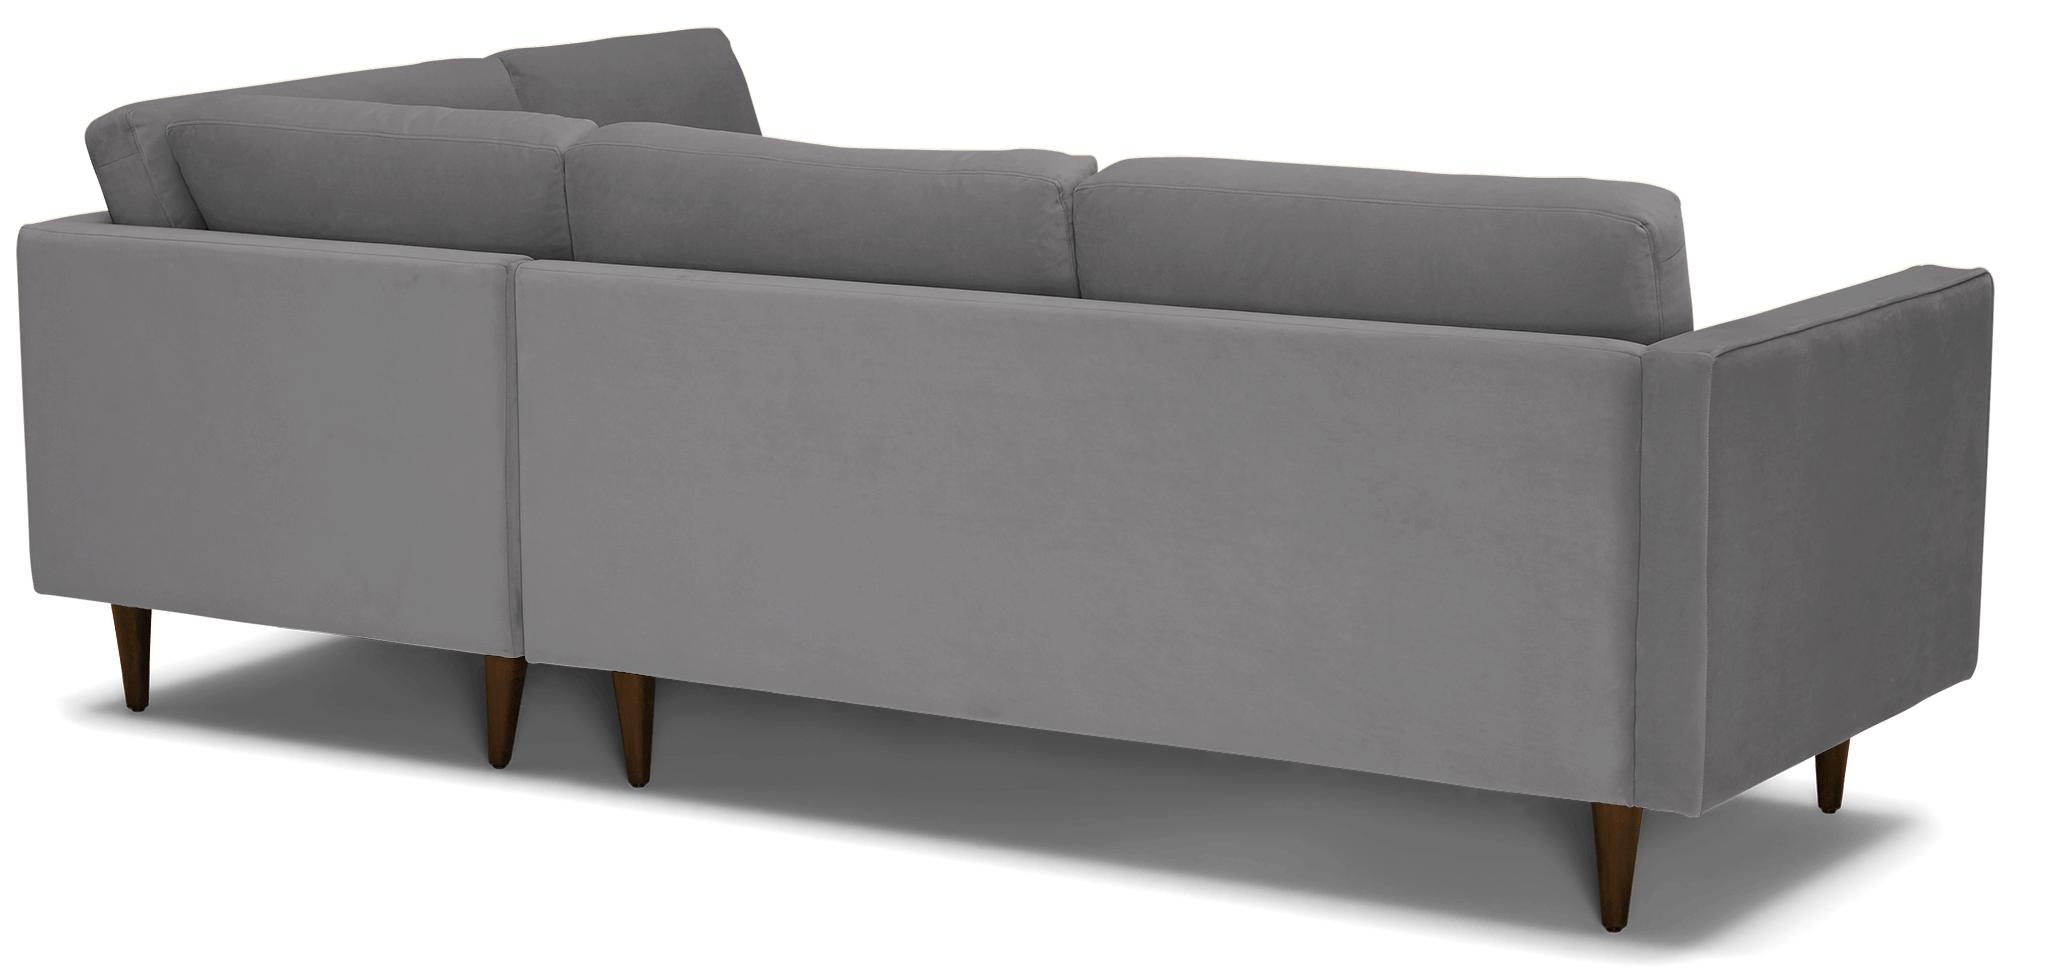 Gray Briar Mid Century Modern Sectional with Bumper - Royale Ash - Mocha - Right  - Image 3